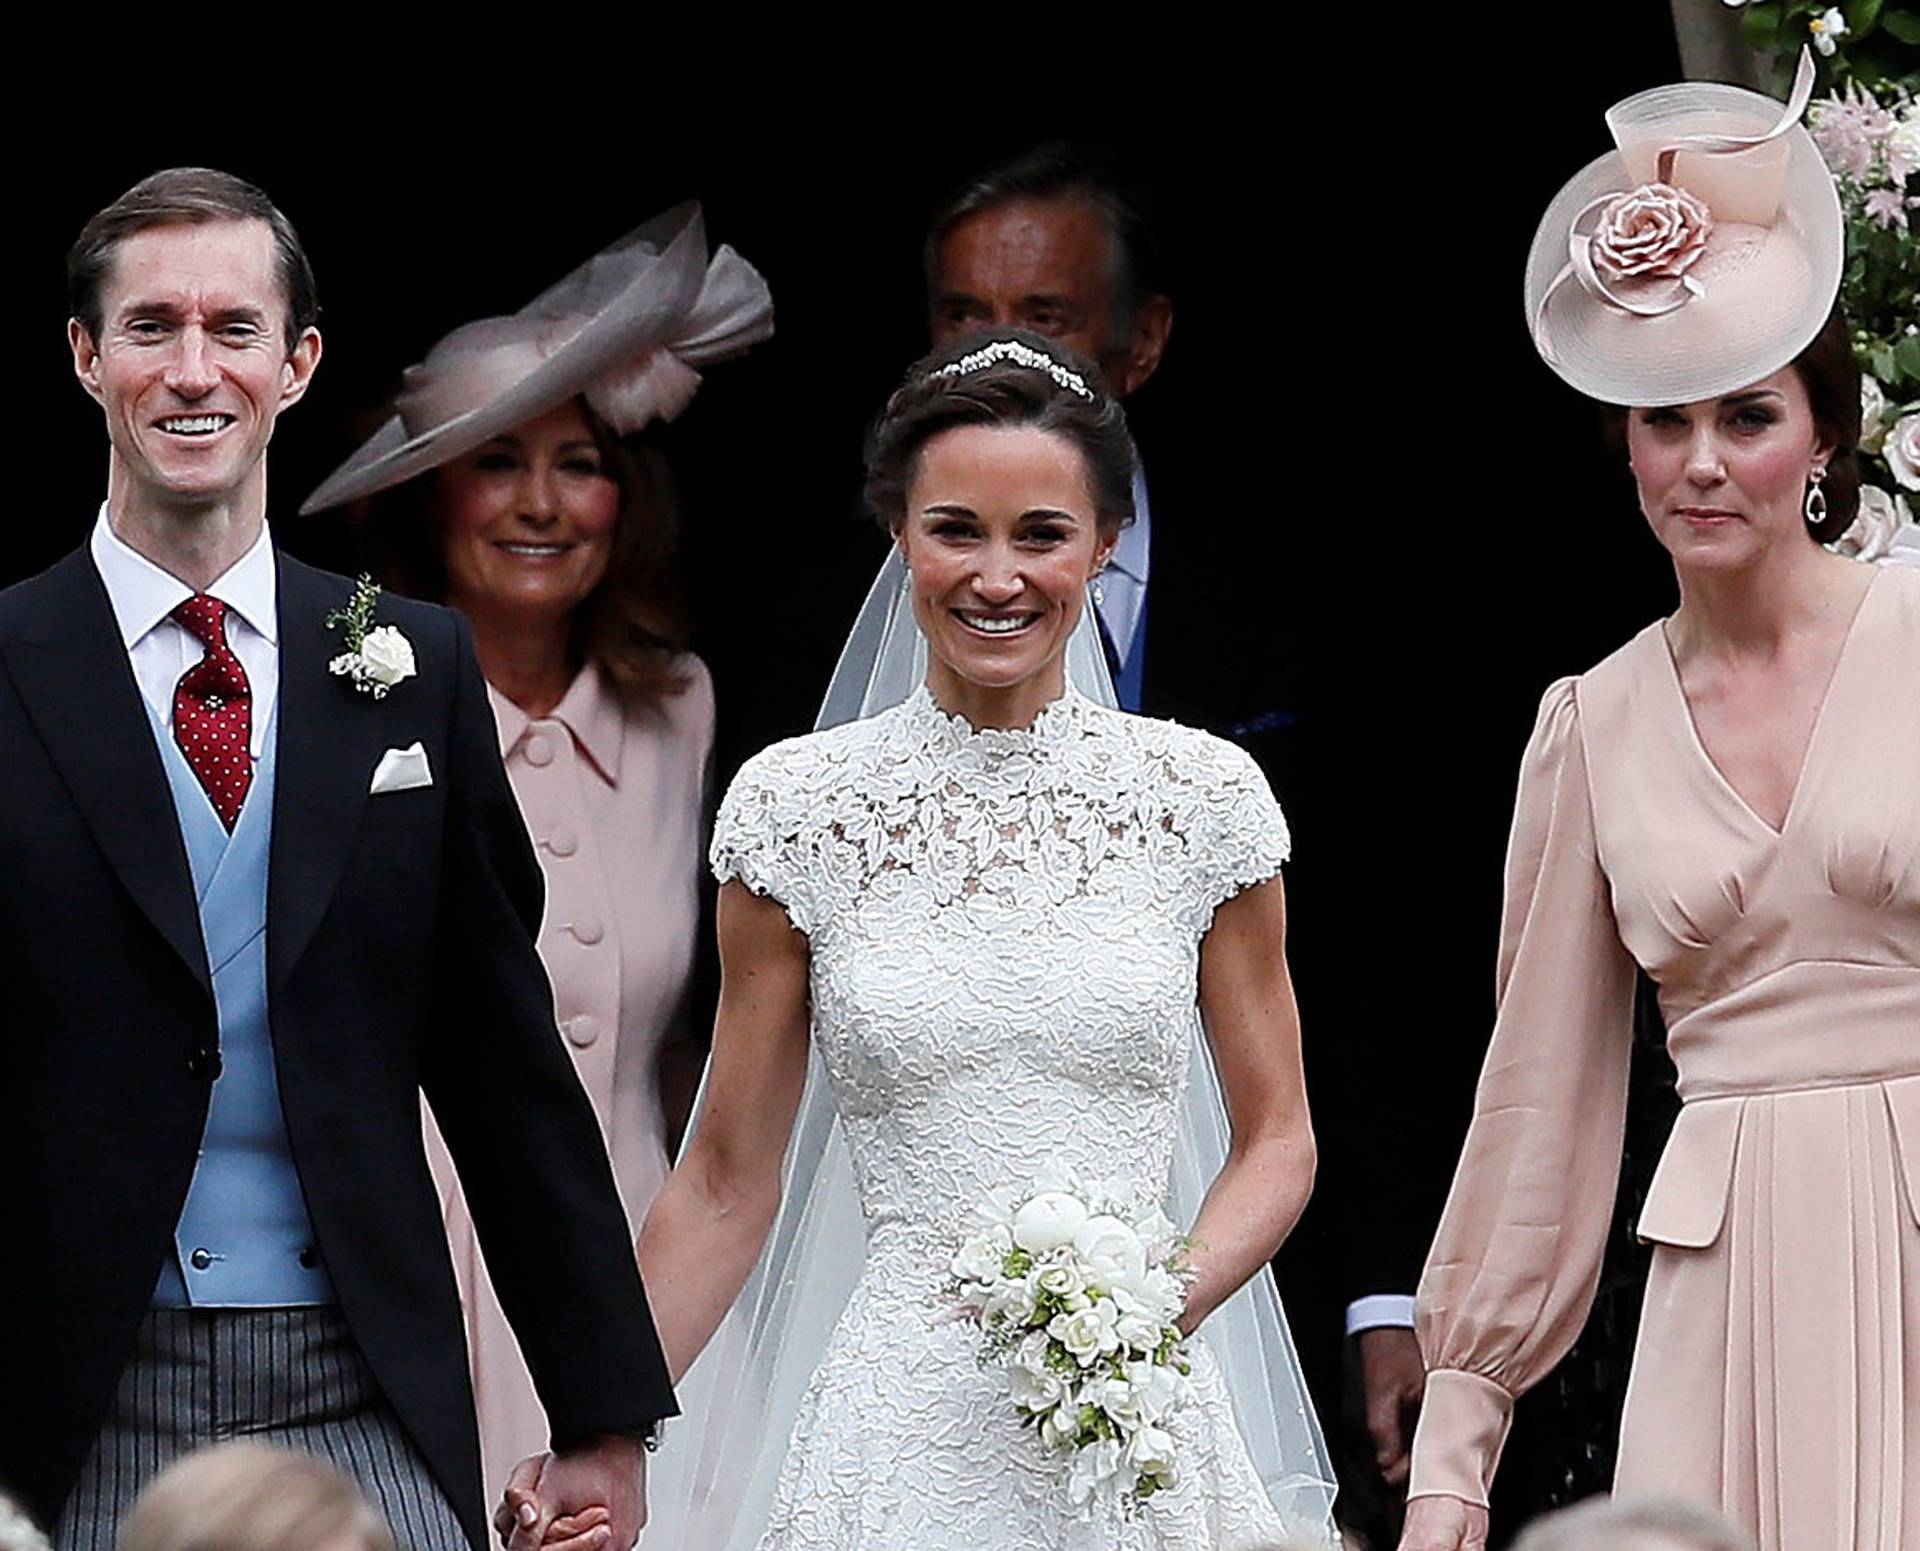 Pippa Middleton and James Matthews smile as they are joined by Britain's Catherine, Duchess of Cambridge after their wedding at St Mark's Church in Englefield